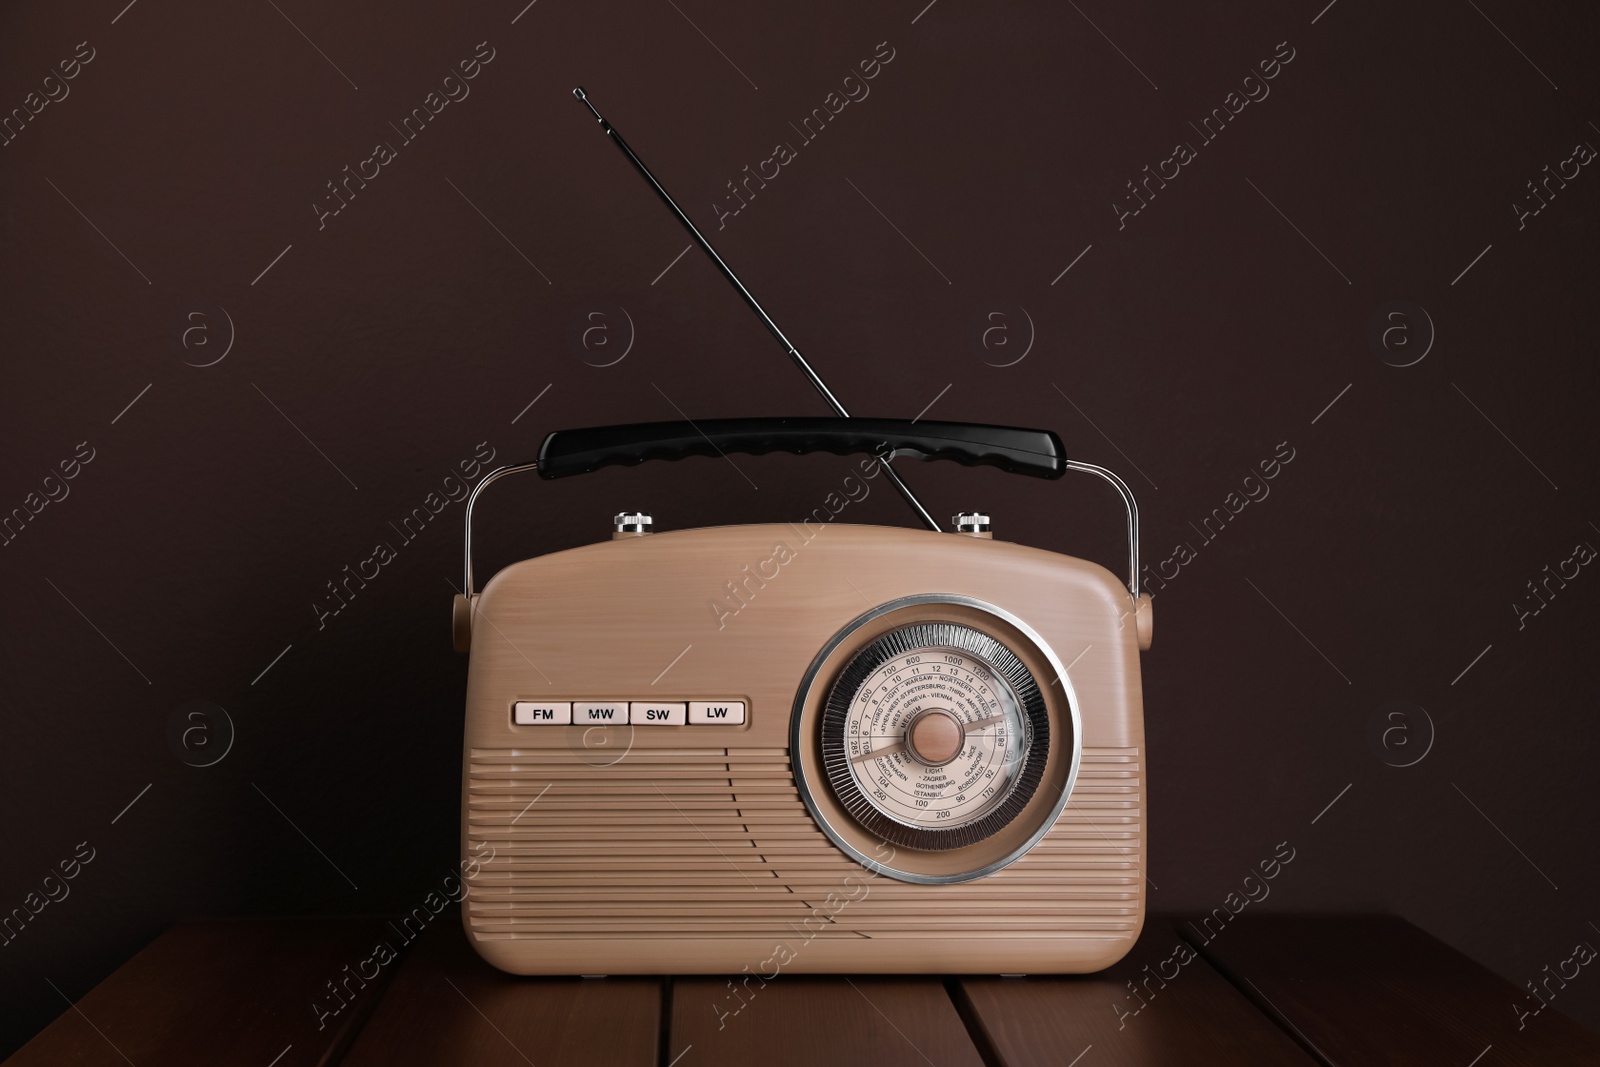 Photo of Retro radio receiver on wooden table against brown background